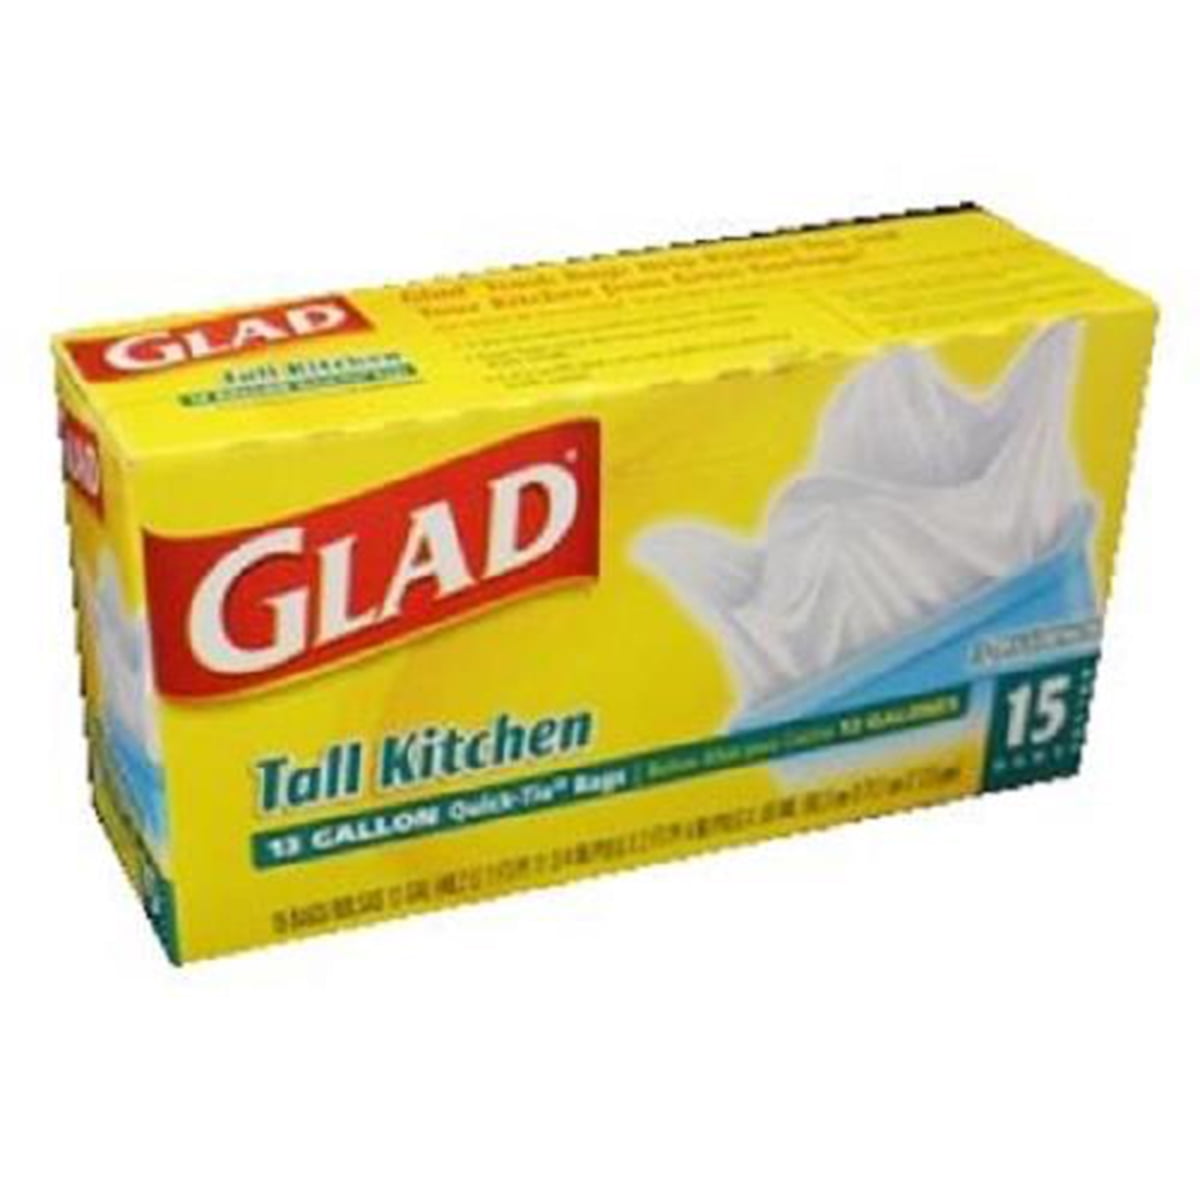 Glad Quick-Tie Tall Kitchen Cloroxpro Trash Bags - 13 Gallon - 200 Count  (15931) (Packaging May Vary) 